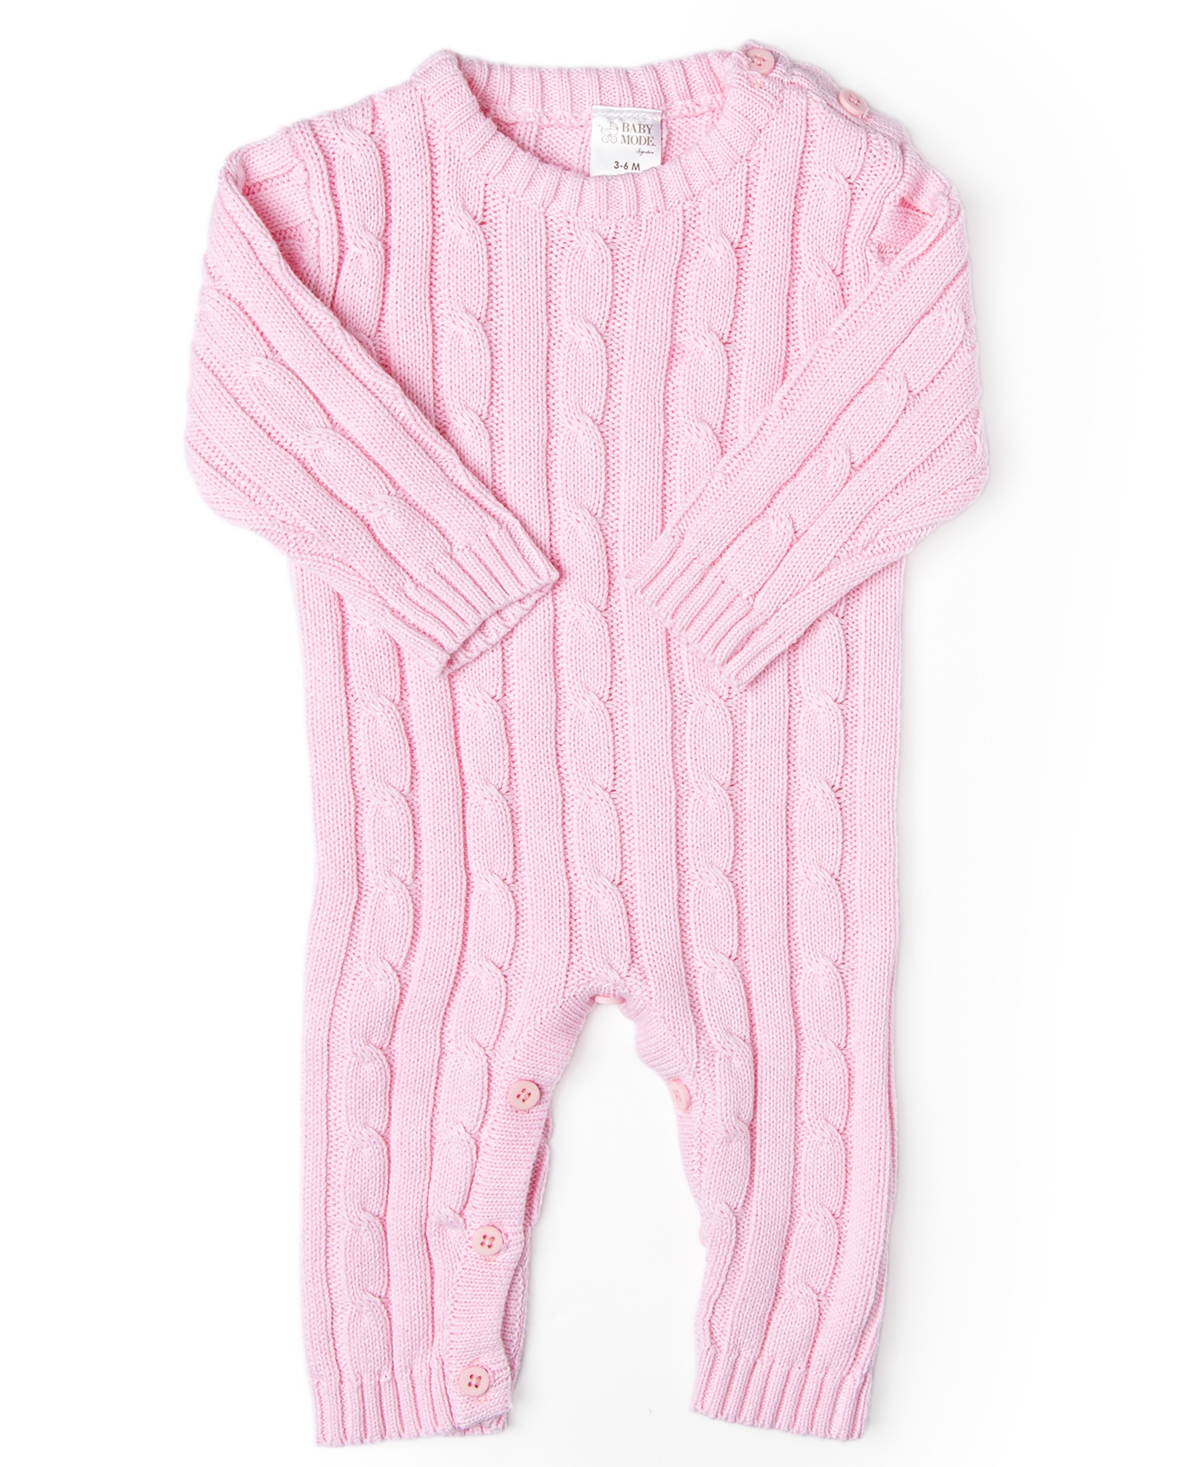 Baby Mode Signature Baby Boys Or Baby Girls Long Sleeved Cable Knit Coverall In Light Pink